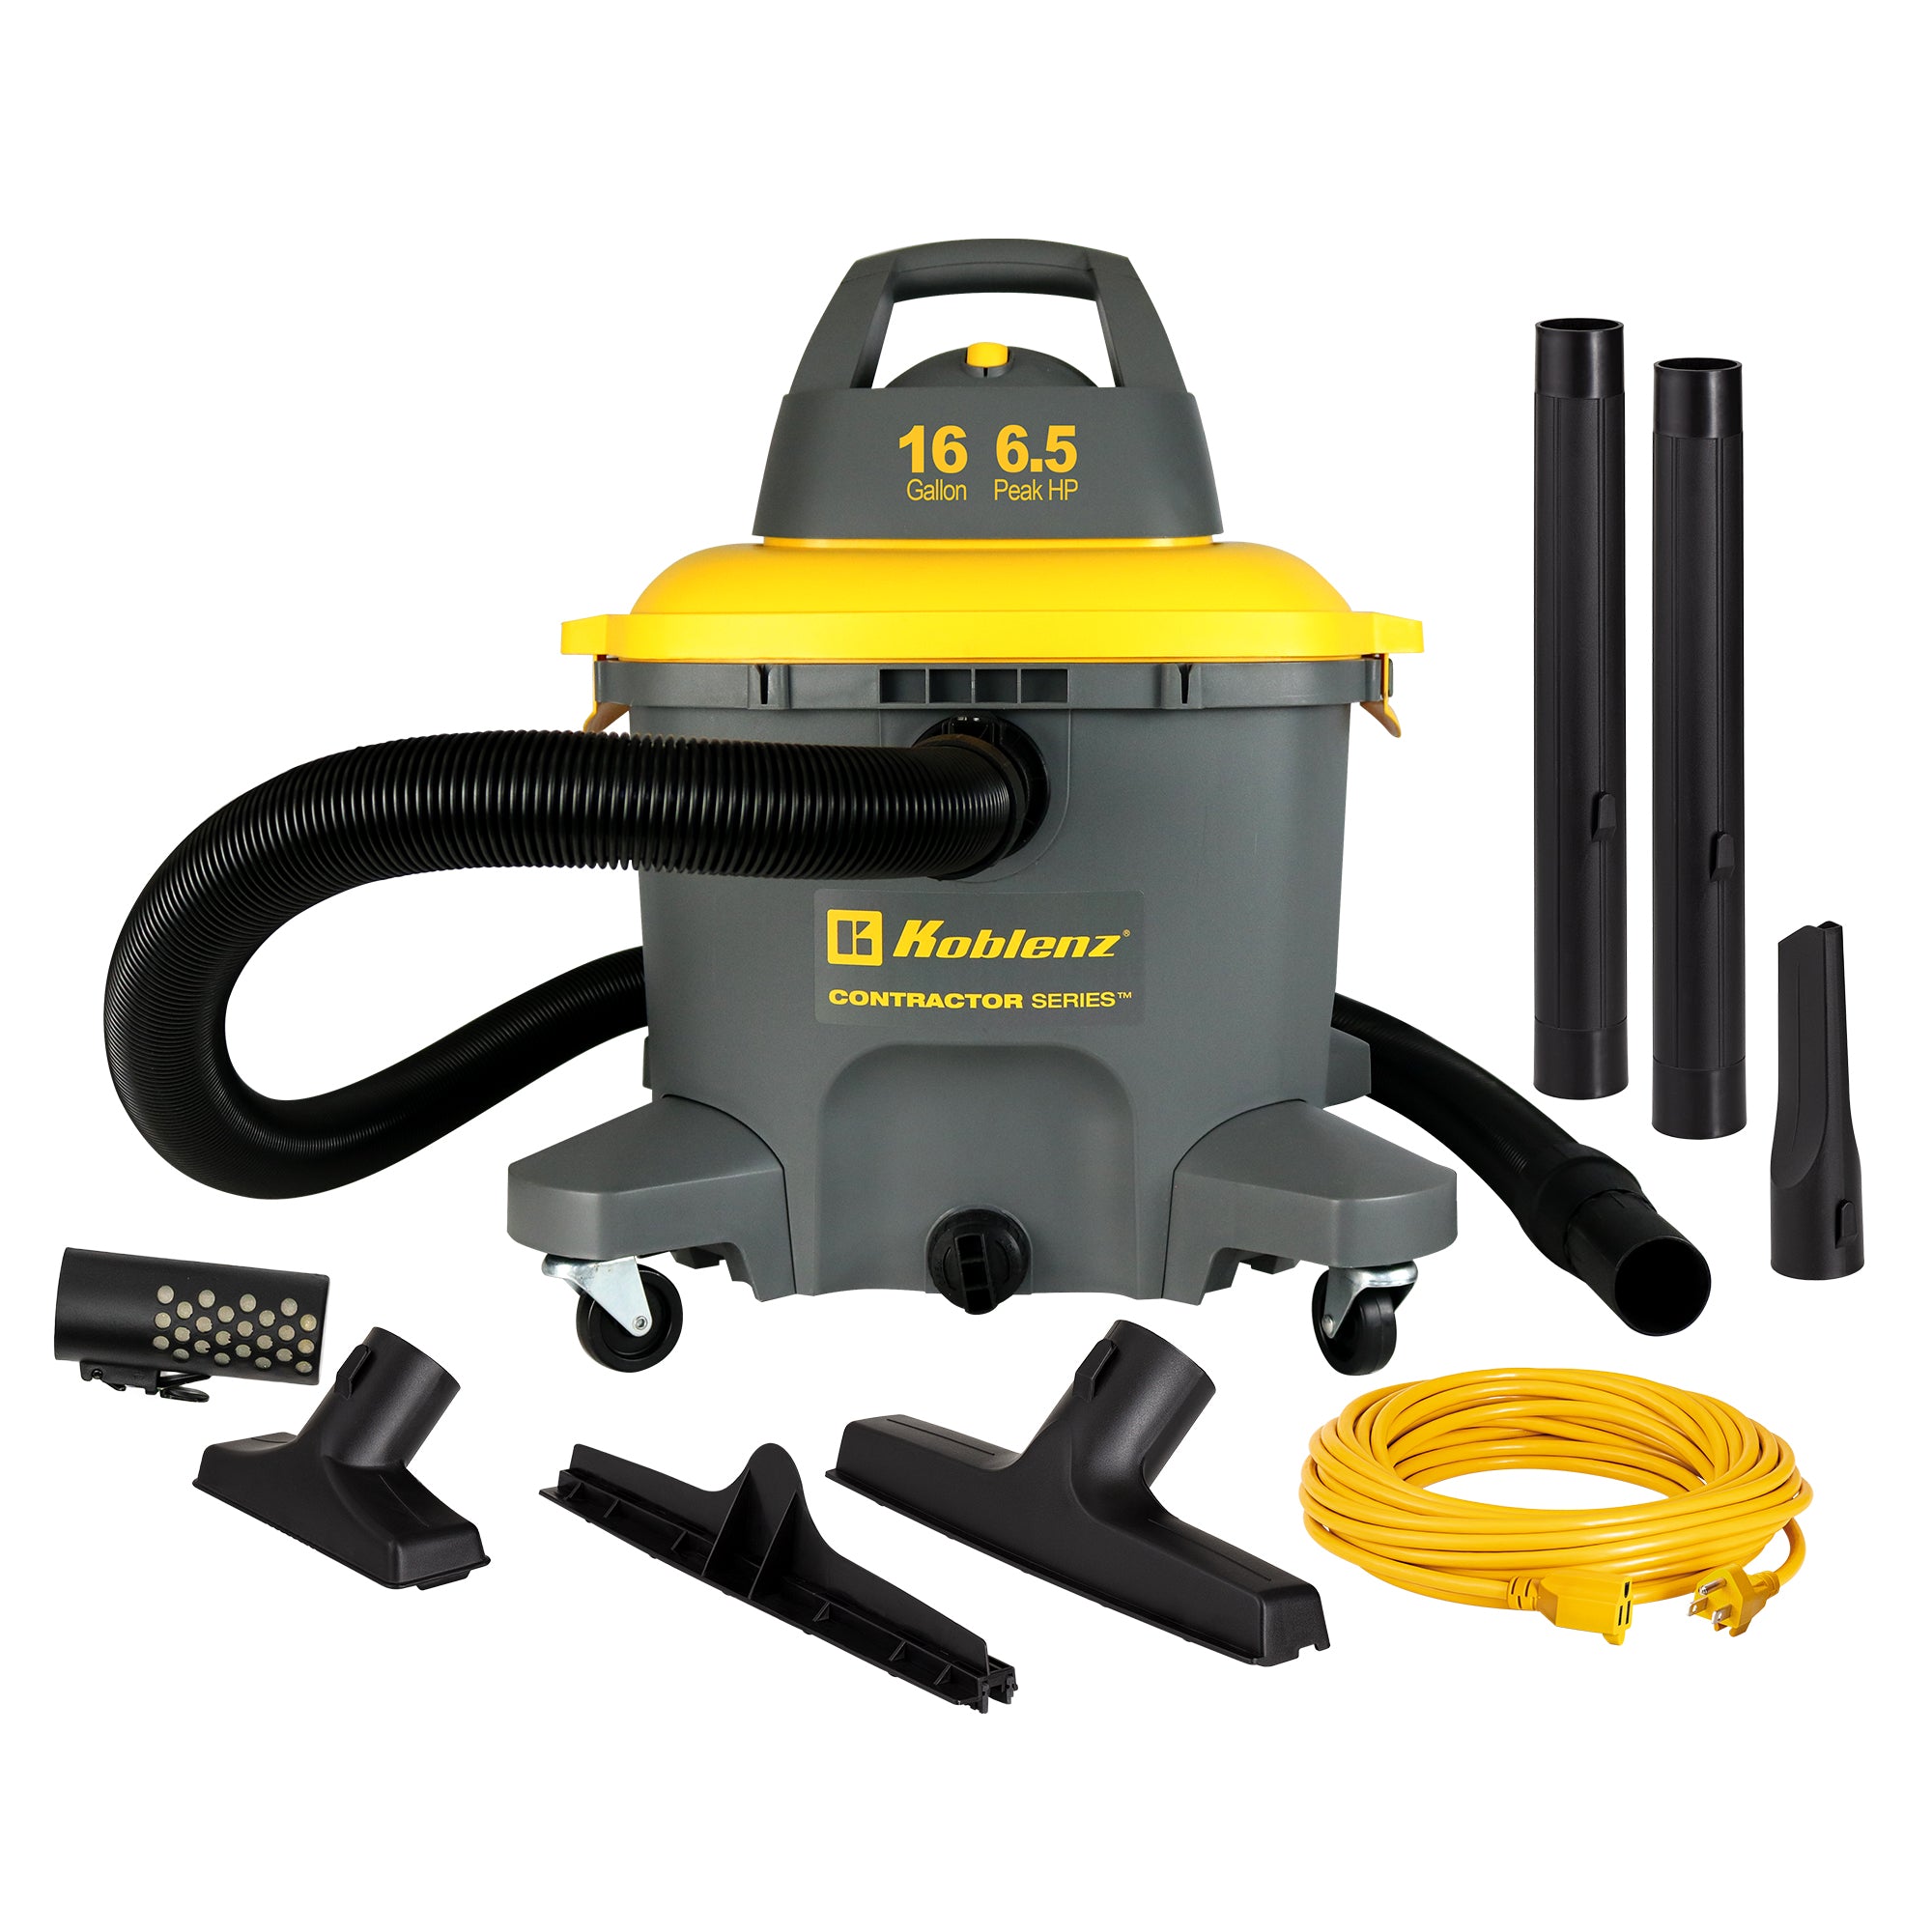 Contractor 16 Gallon 6.5 PHP Wet Dry Shop Vacuum WD-16 C4